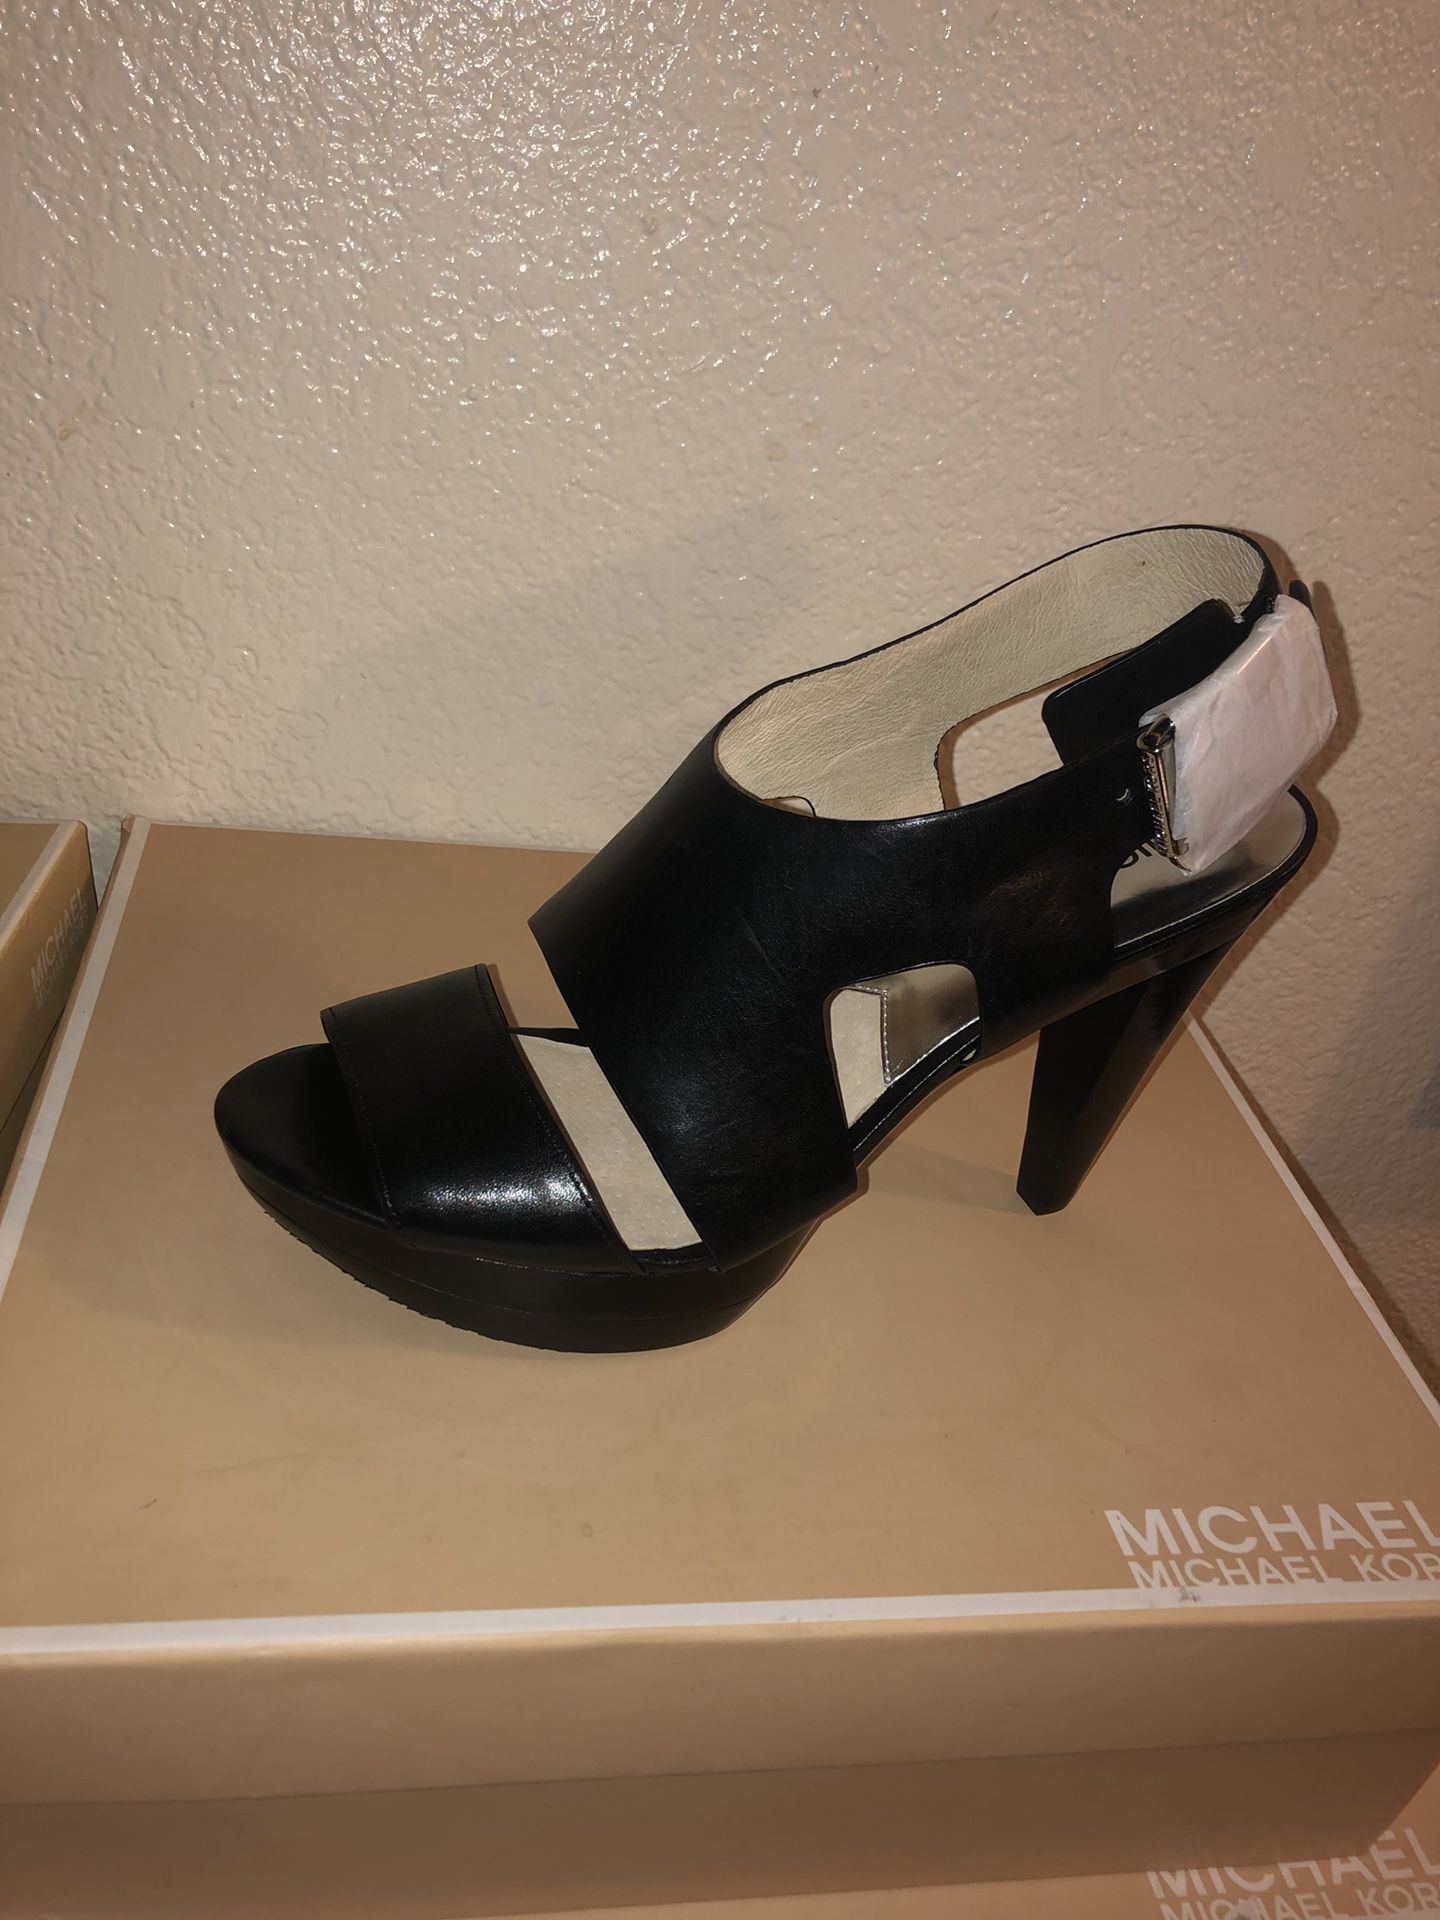 Brand name shoes size 10